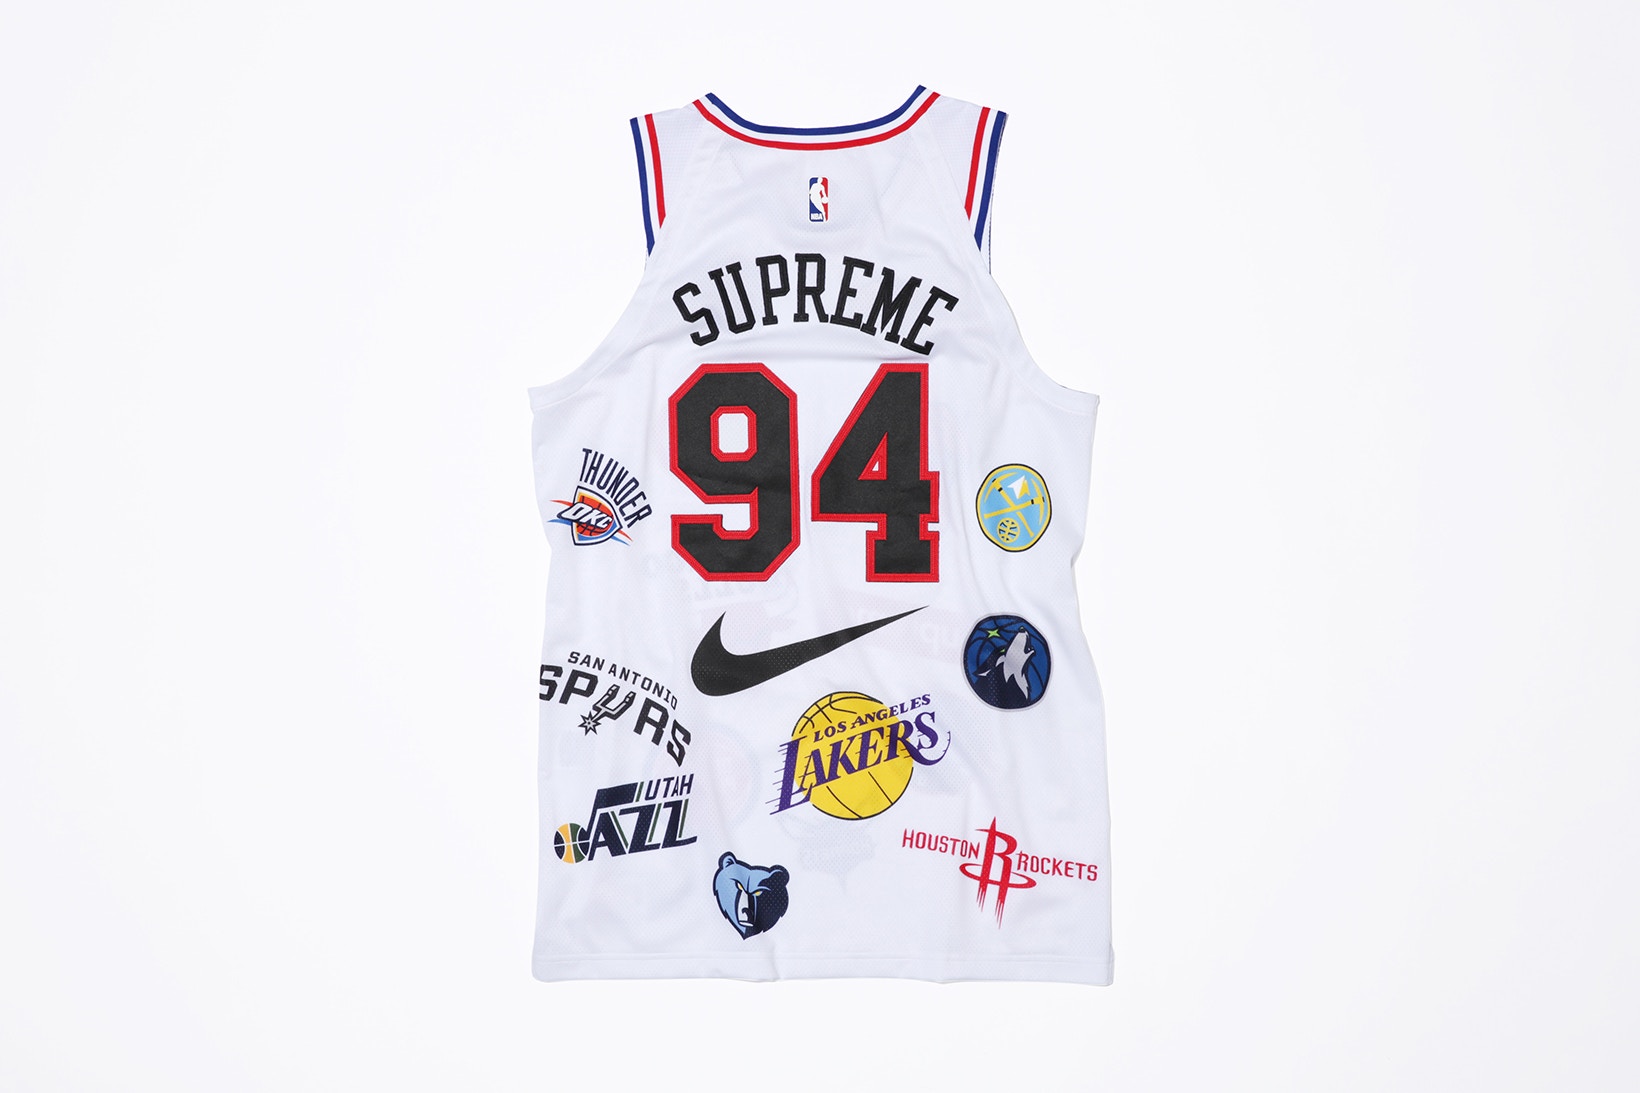 Here's the Complete Supreme x Nike NBA Collection